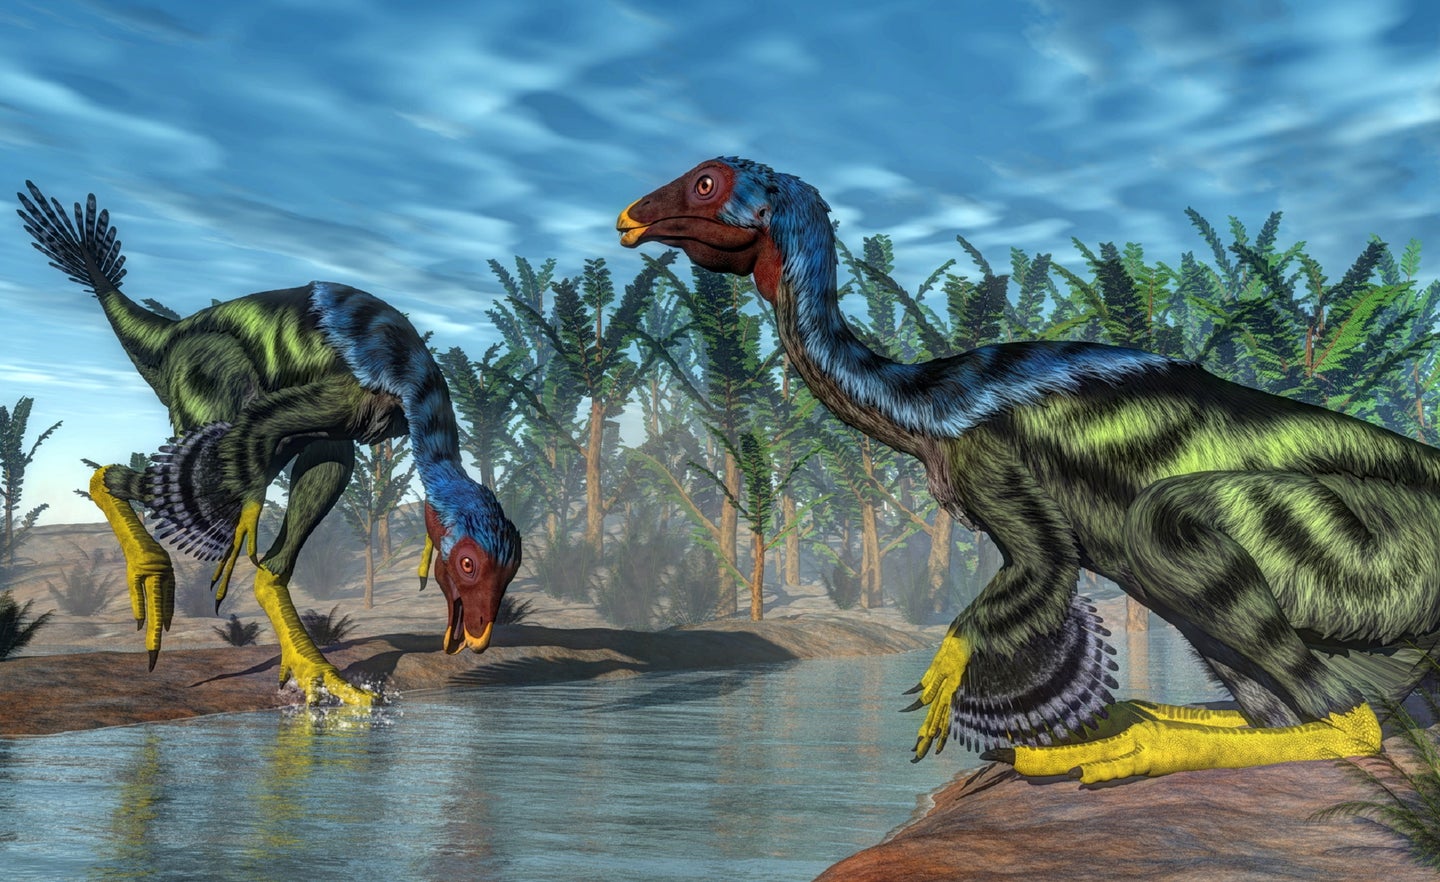 Feathered Caudipteryx dinosaurs drinking from a sandy river among palm trees before the asteroid hit